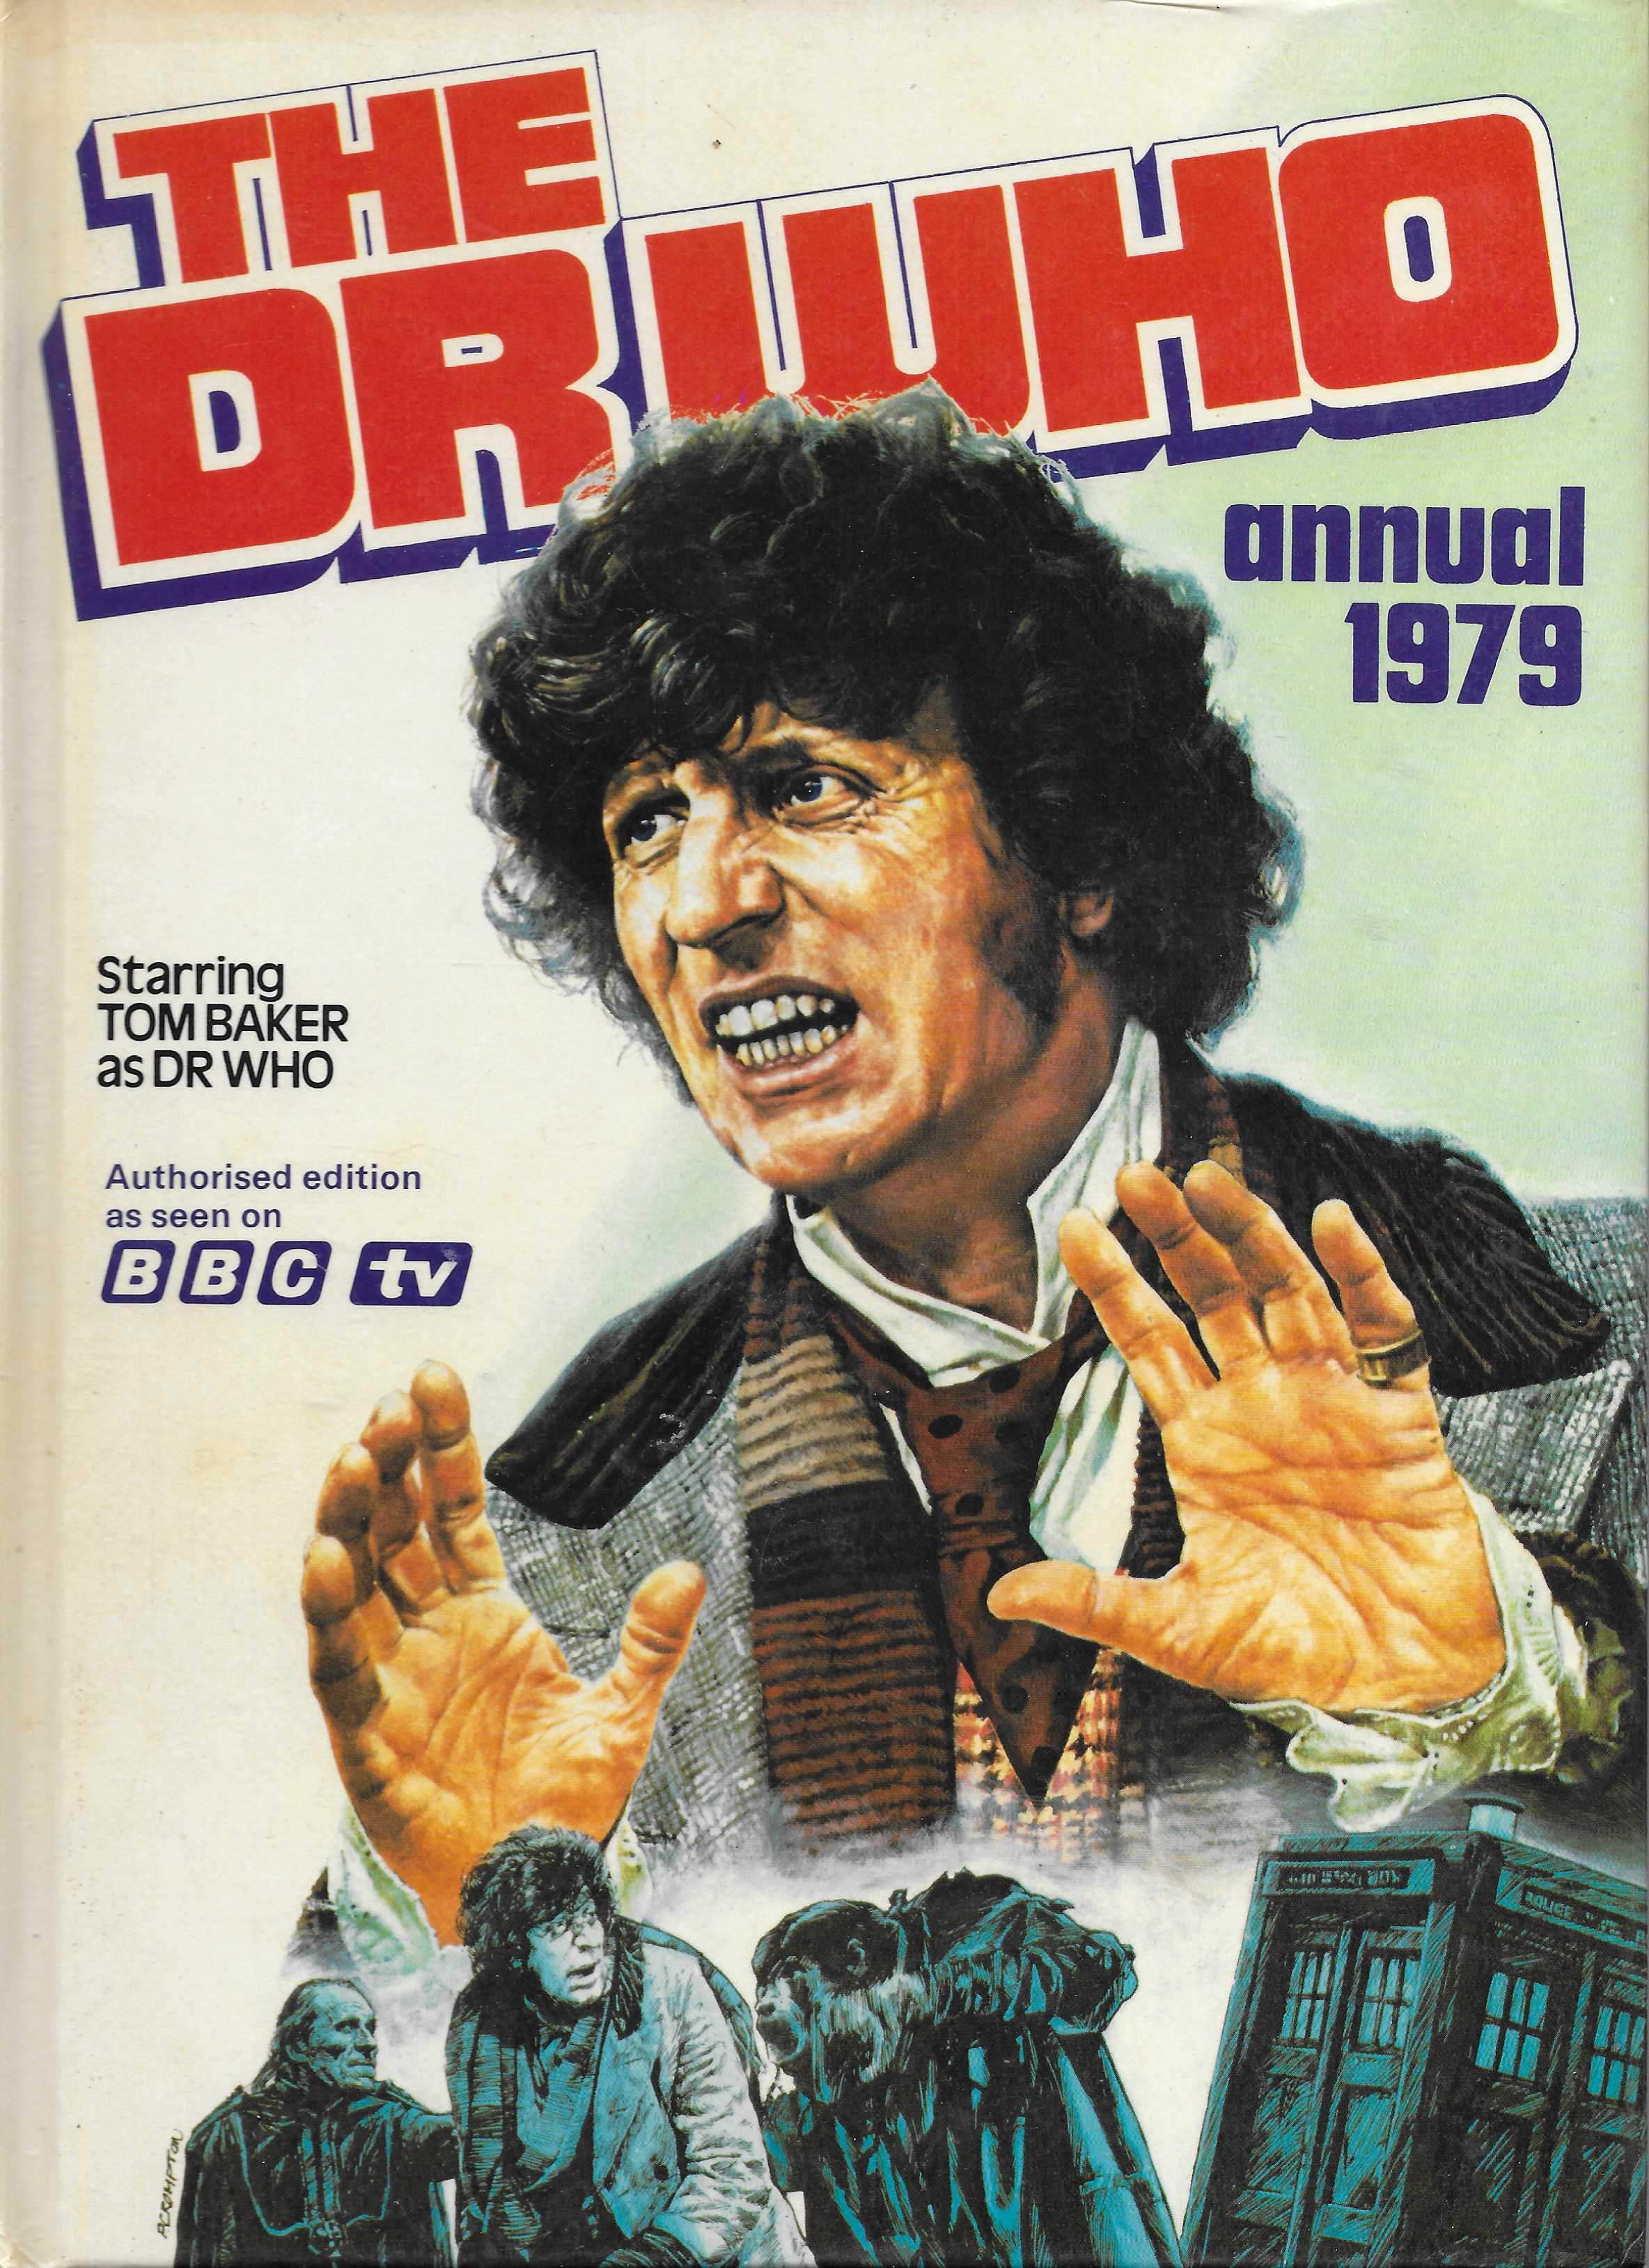 Picture of The Dr Who annual 1979 by artist Various from the BBC books - Records and Tapes library